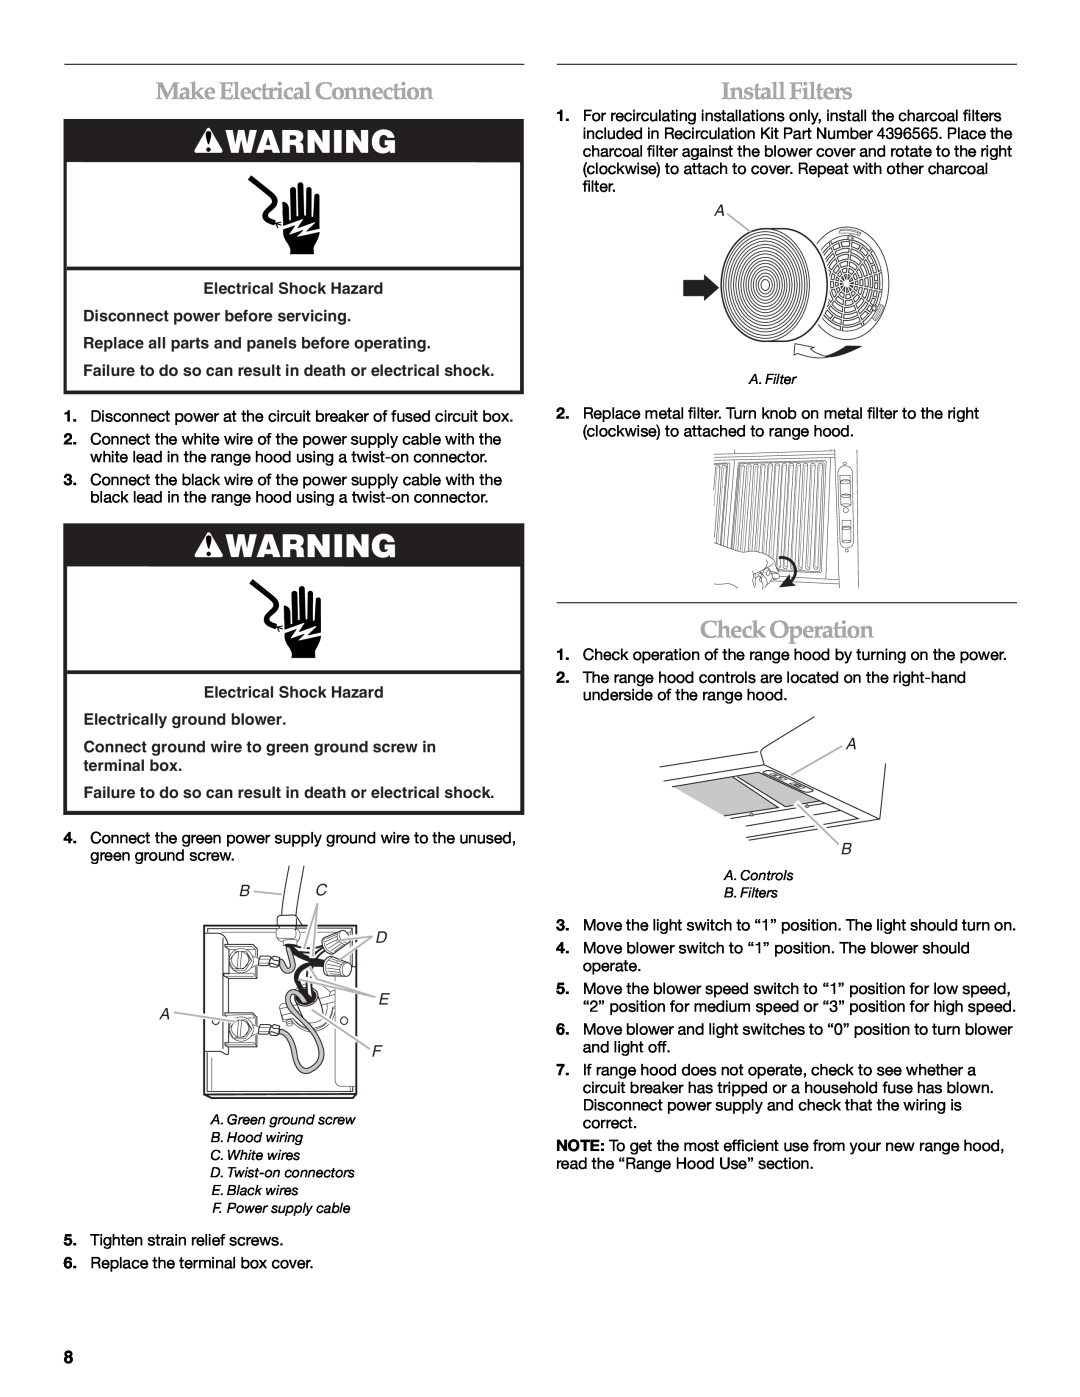 KitchenAid 2005 installation instructions Make Electrical Connection, Install Filters, Check Operation, B C D E A F 